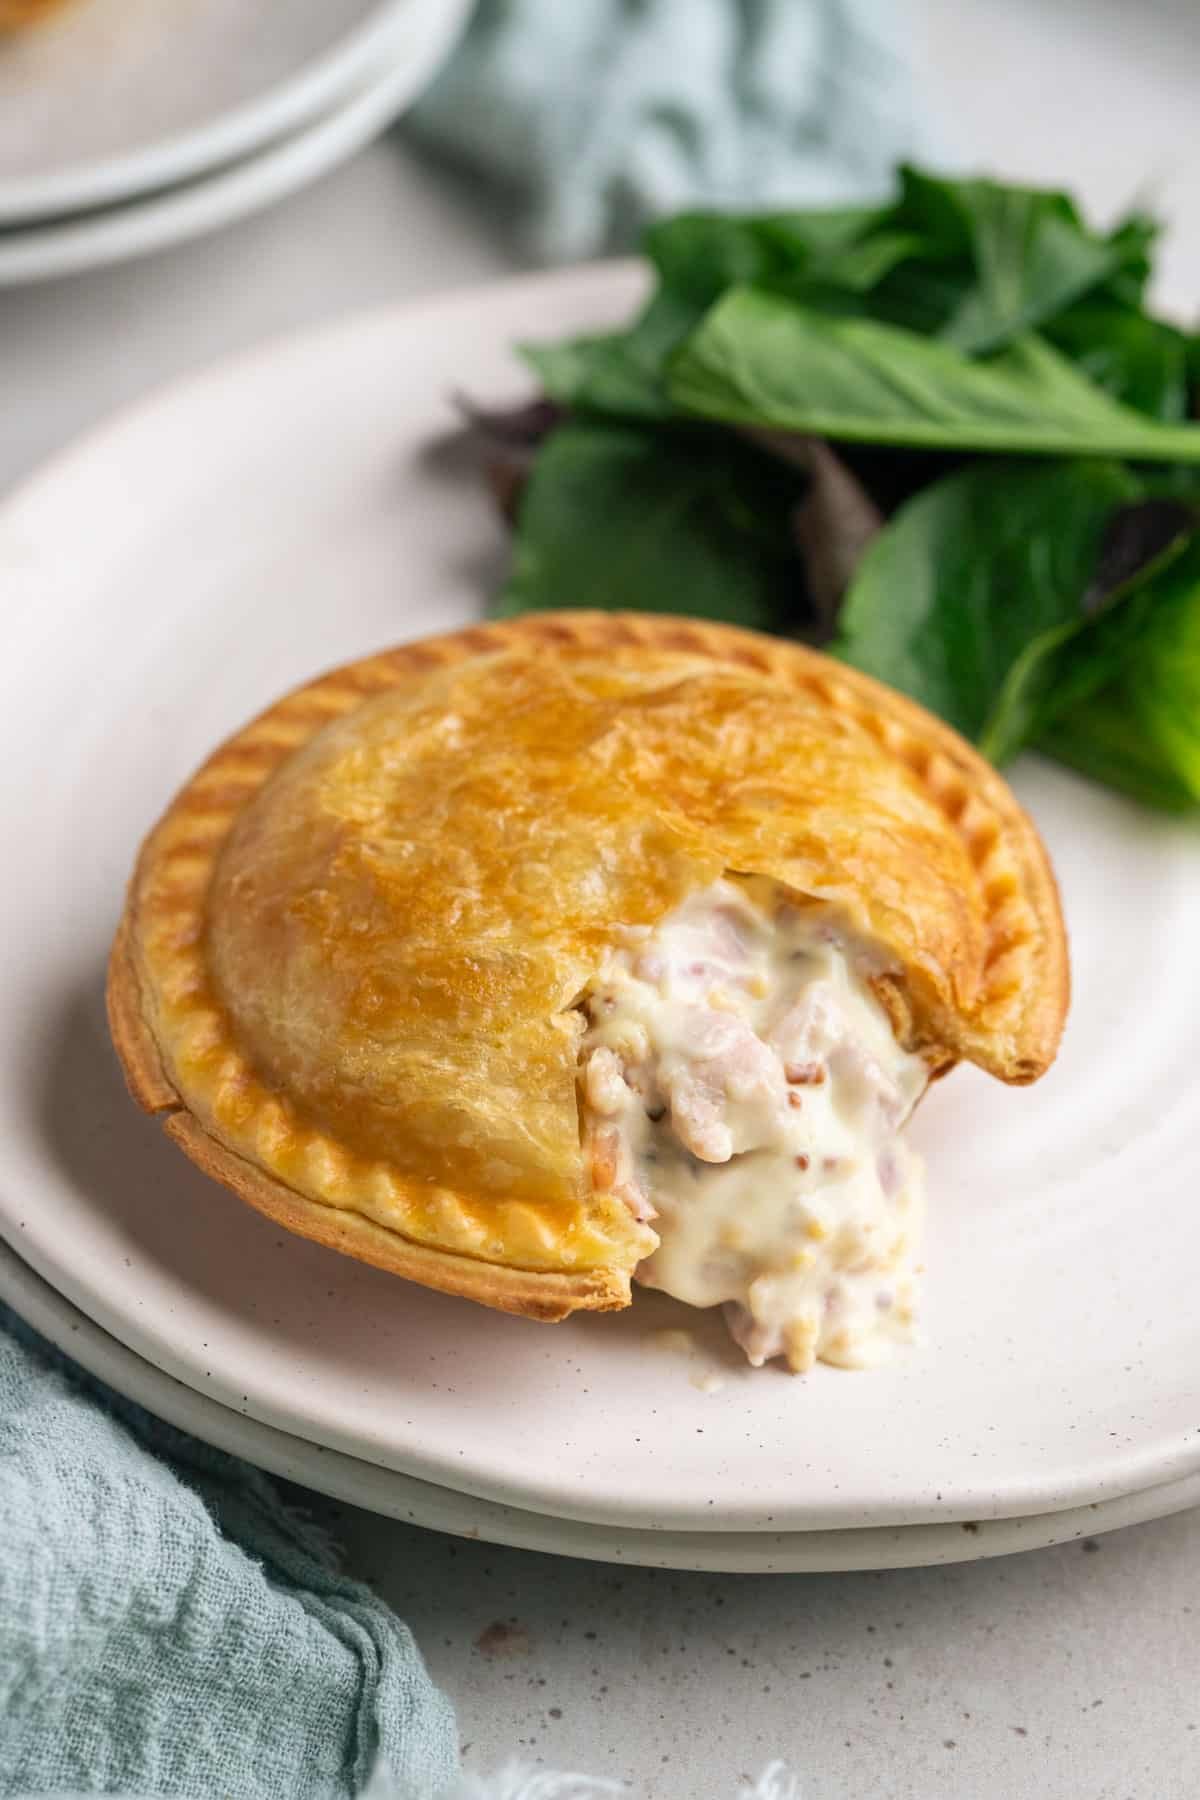 a chicken pie on a plate, with salad.